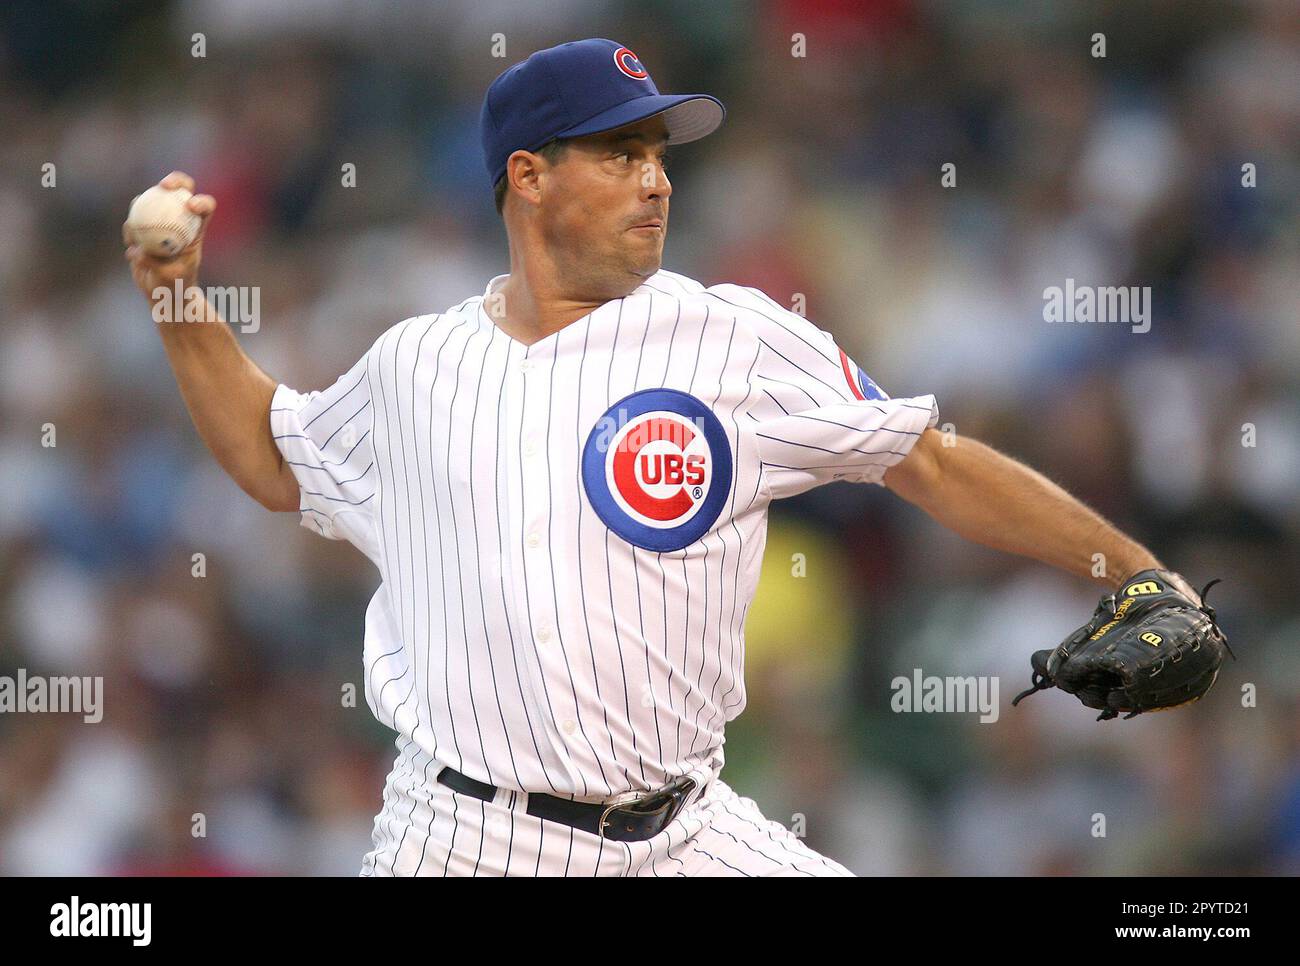 Chicago Cubs pitcher Greg Maddux works against the Cincinnati Reds at Wrigley Field on May 30, 2006, in Chicago. (Photo by Nuccio DiNuzzo/Chicago Tribune/TNS/Sipa USA) Stock Photo